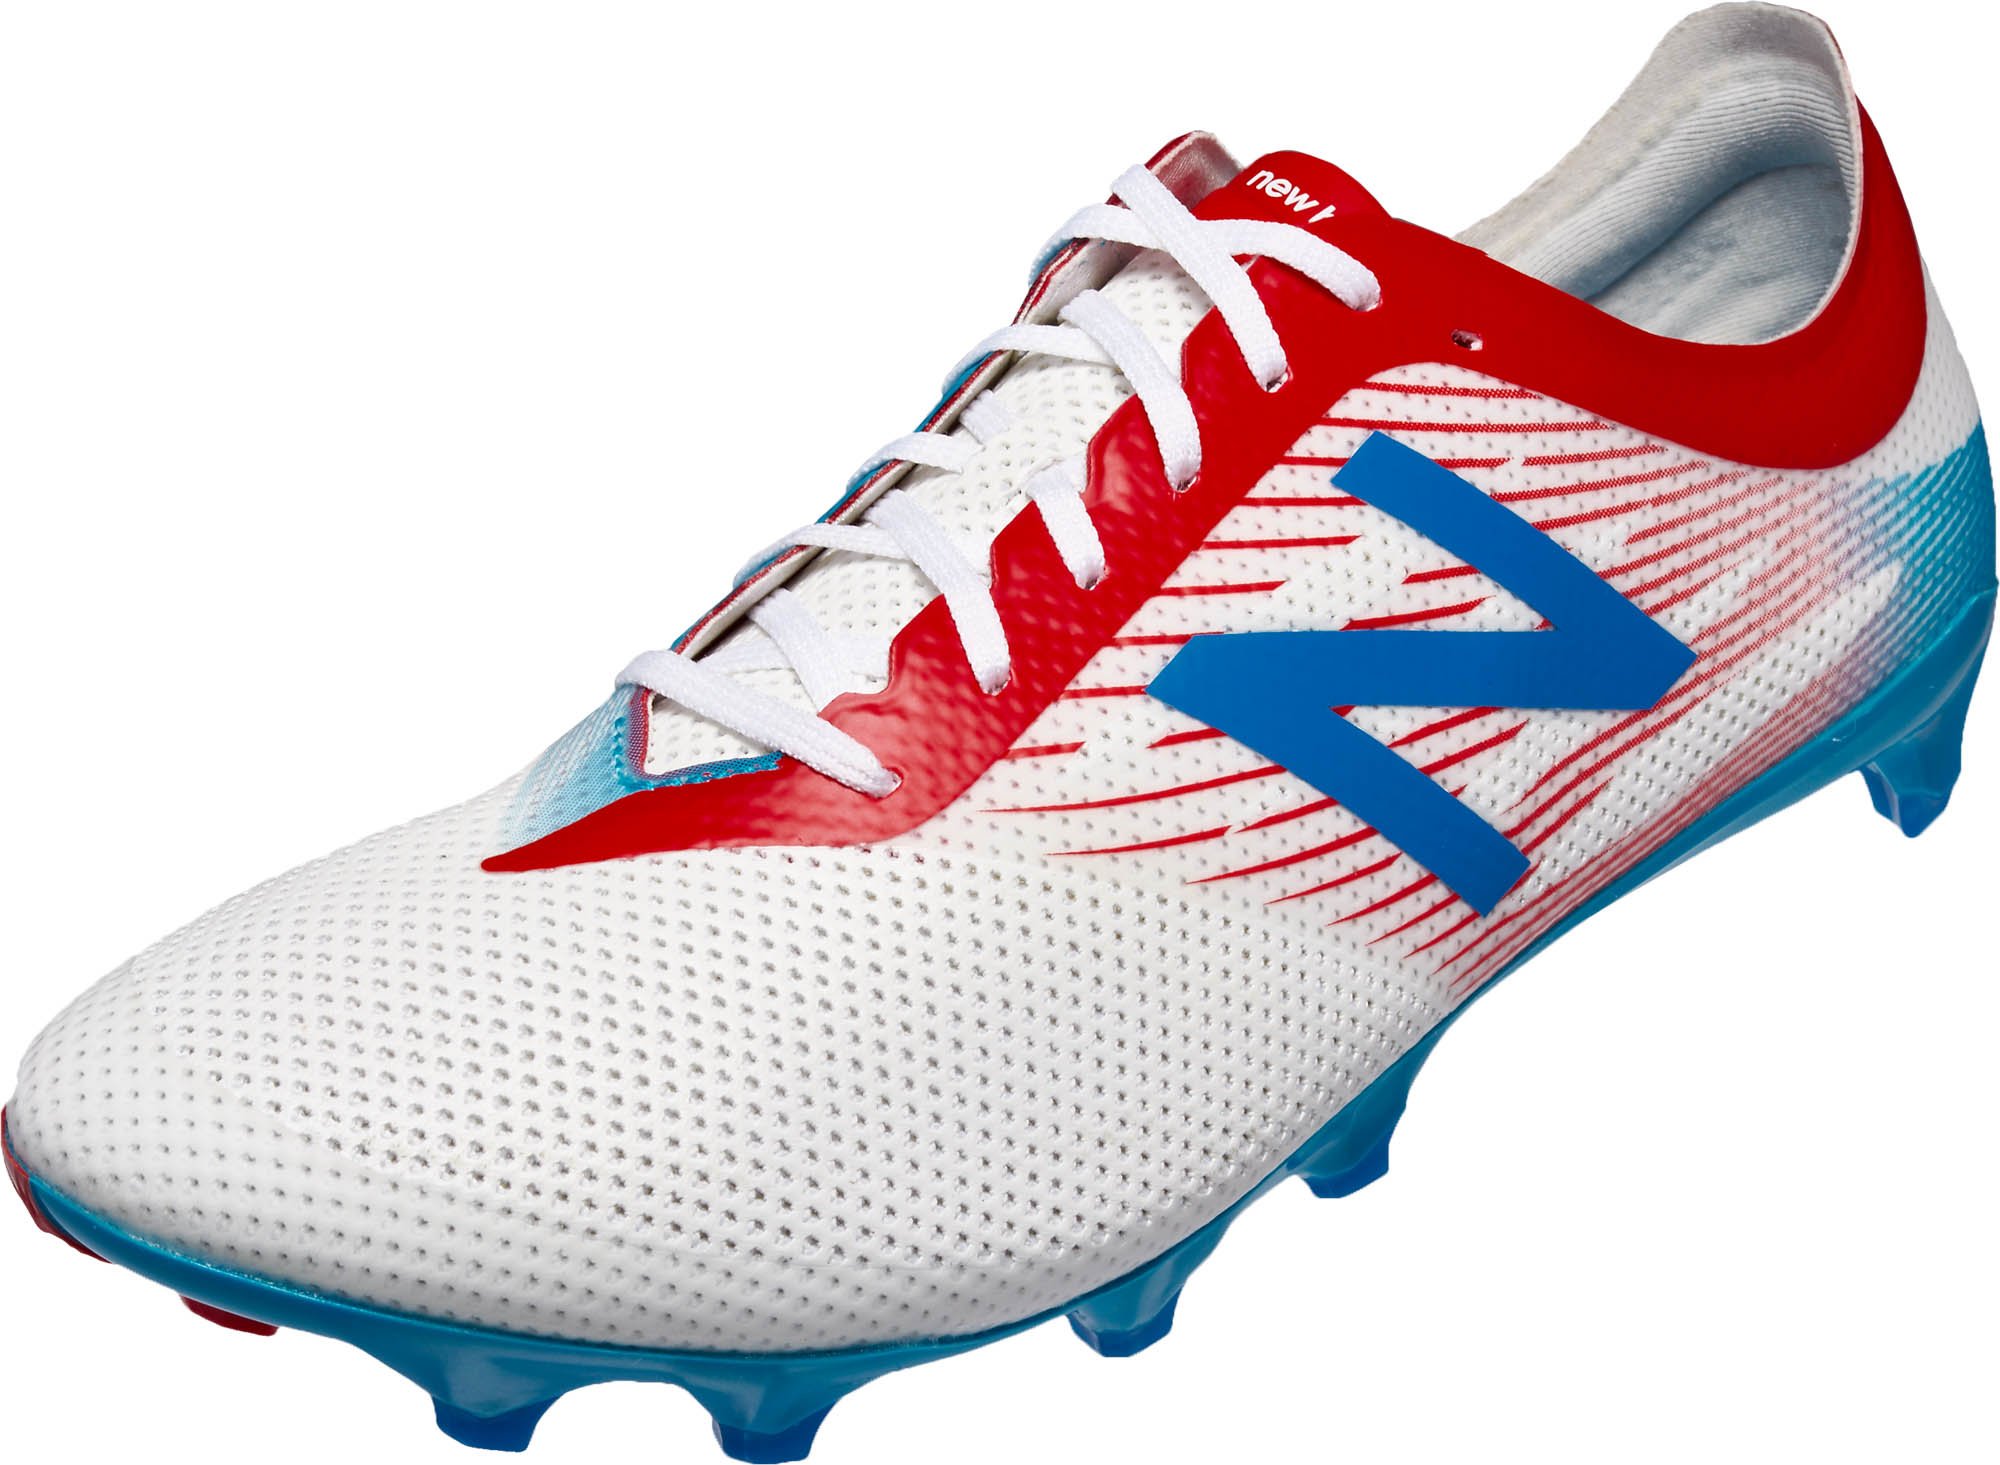 new balance soccer cleats release